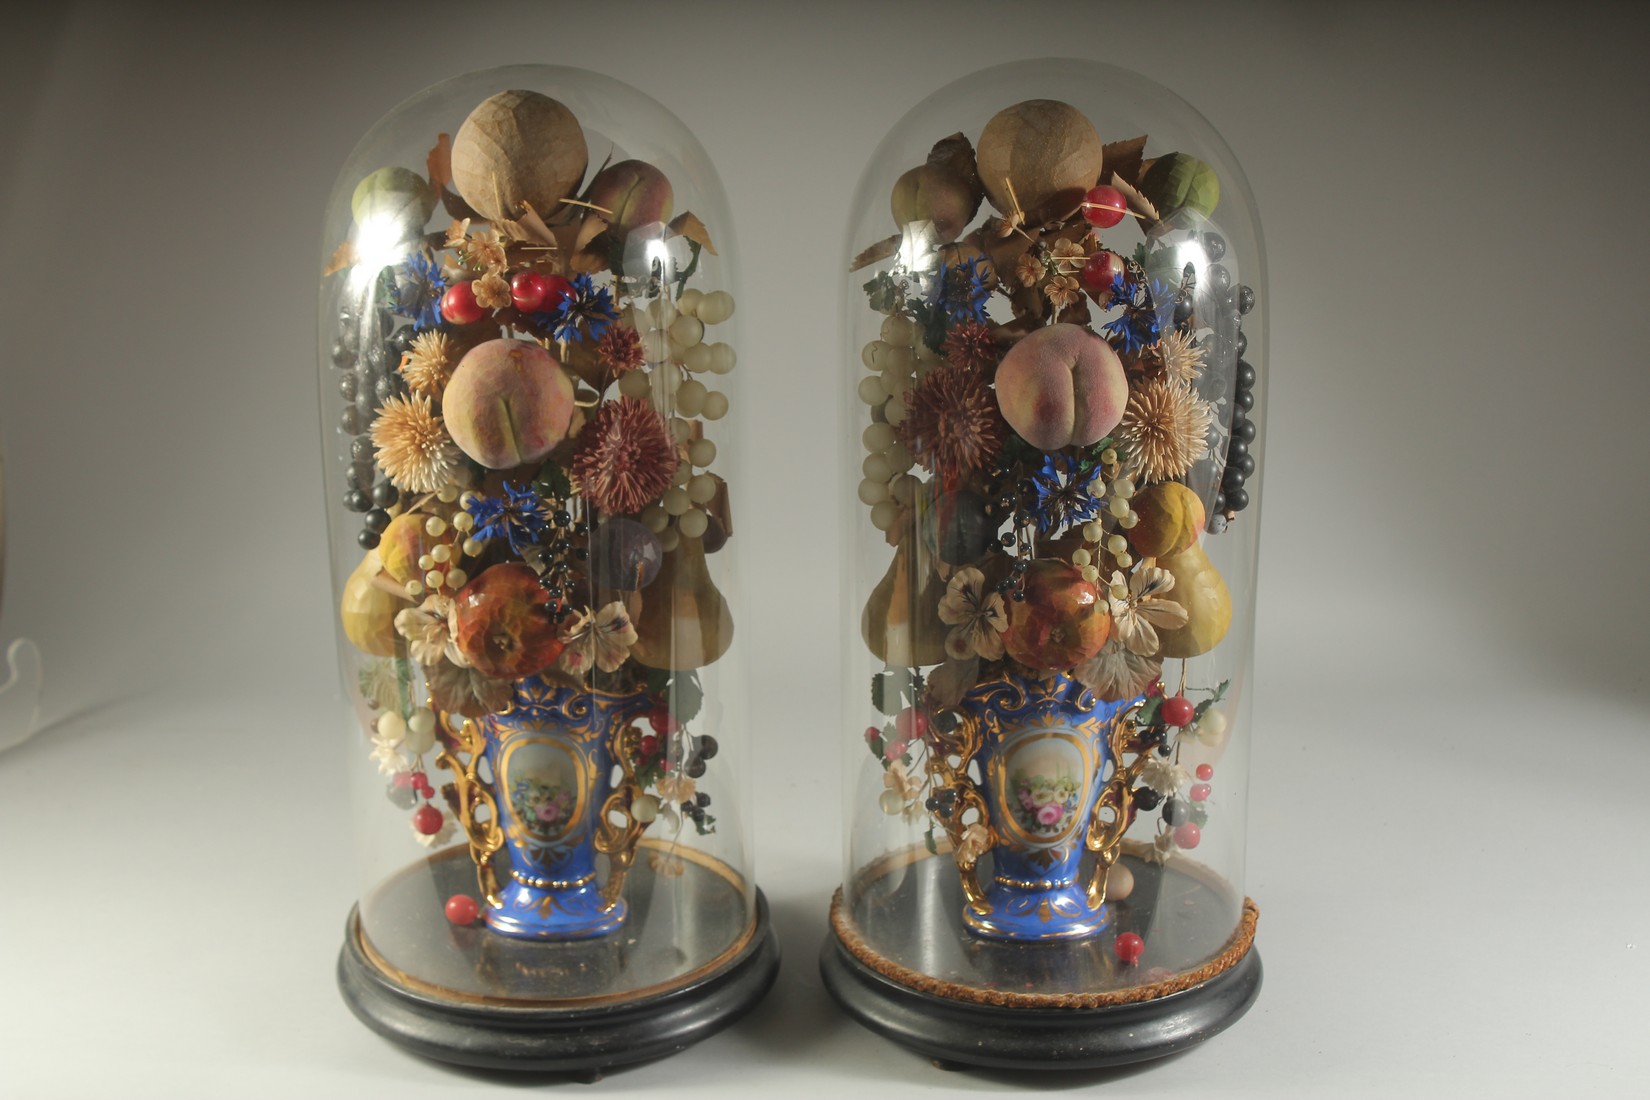 A VERY GOOD PAIR OF VICTORIAN GLASS DOMES, WAX FRUIT in a vase. 23ins overall. - Image 4 of 4